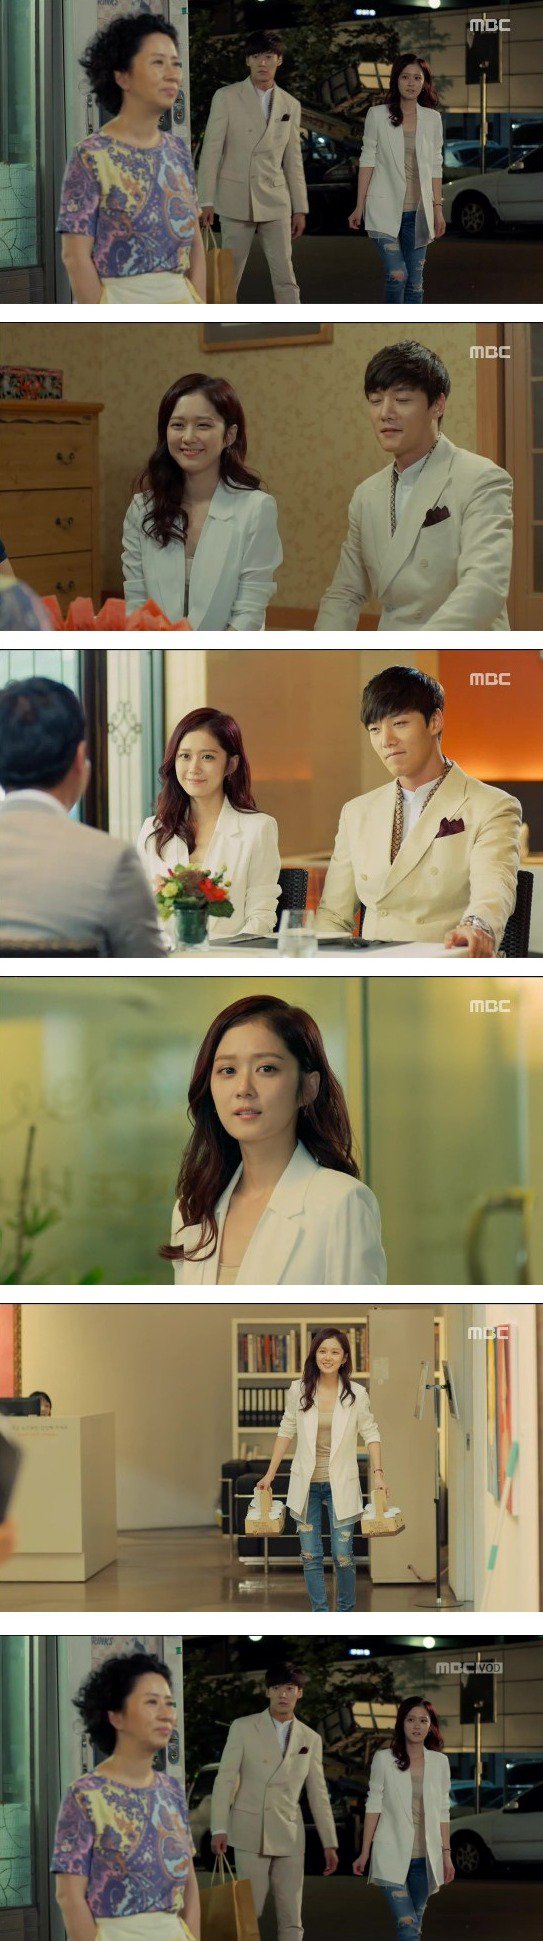 episode 13 captures for the Korean drama 'Fated to Love You'